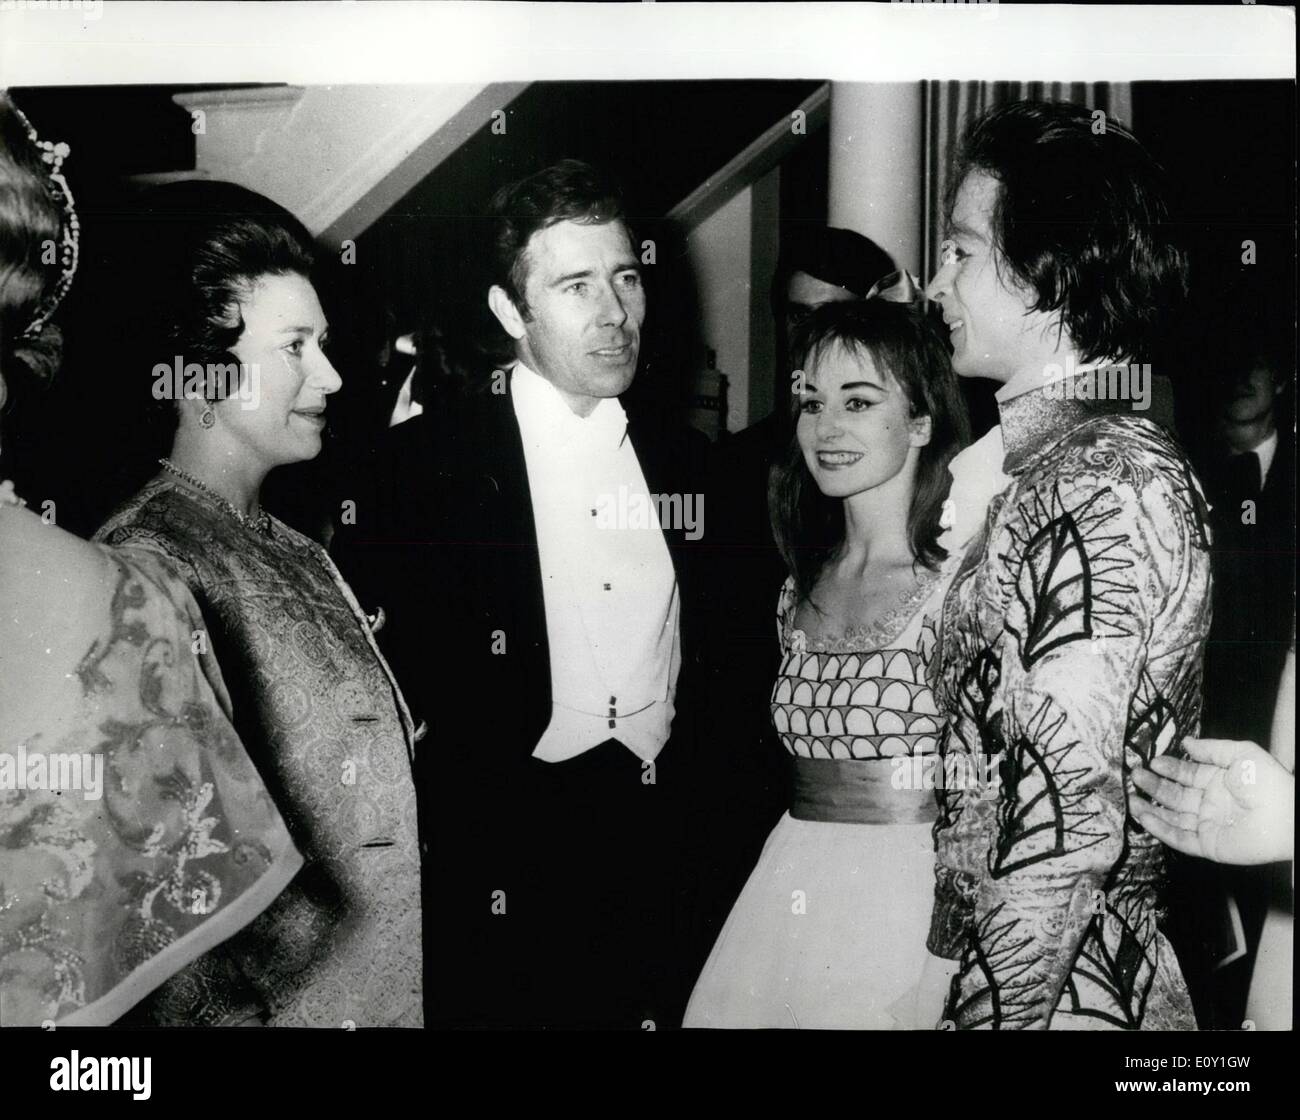 Mar. 03, 1968 - Prince Charles And Princess Anne See ''The Nutcracker'': Prince Charles and Princess Anne made their first official visit to the the Royal Opera House, Covent Garden, last night, for the gala performance of Rudolf Nureyev's production of ''The Nutcracker''. The Queen Mother took them and Princess Margaret and Lord Snowdon. Photo shows Princess Margaret and Lord Snowdon talking to Rudolf Nureyev and Ballerina Merle Park, after last night's gala performance. Stock Photo